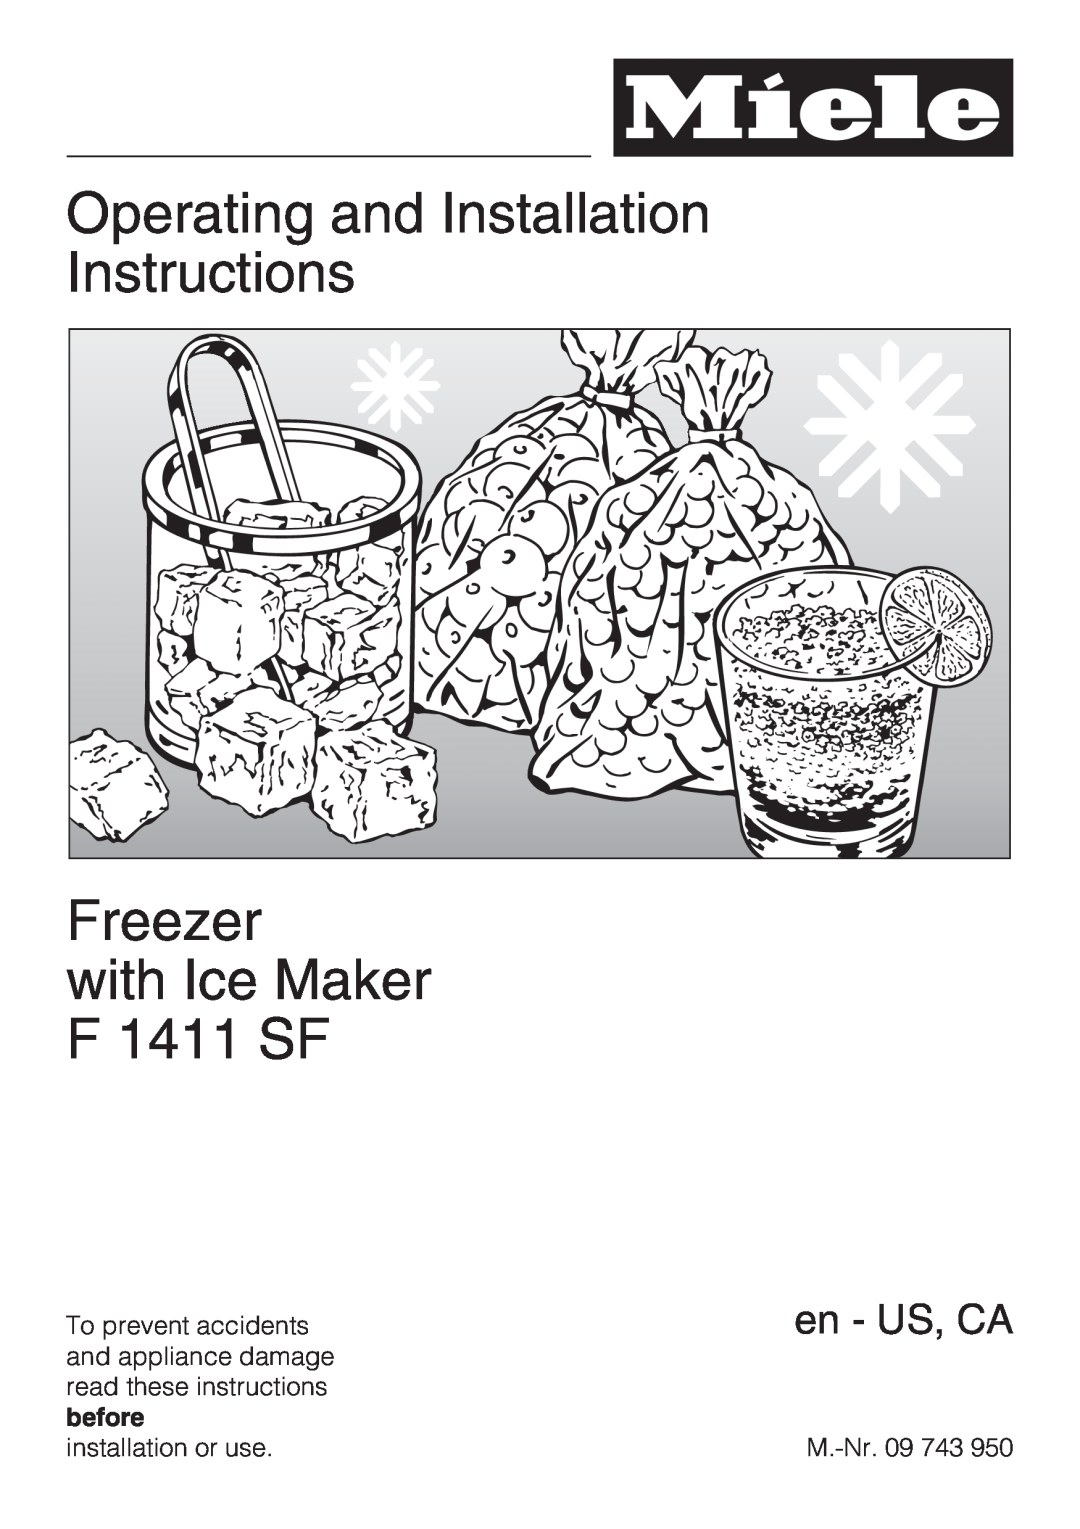 Miele installation instructions Operating and Installation Instructions Freezer, with Ice Maker F 1411 SF, en - US, CA 